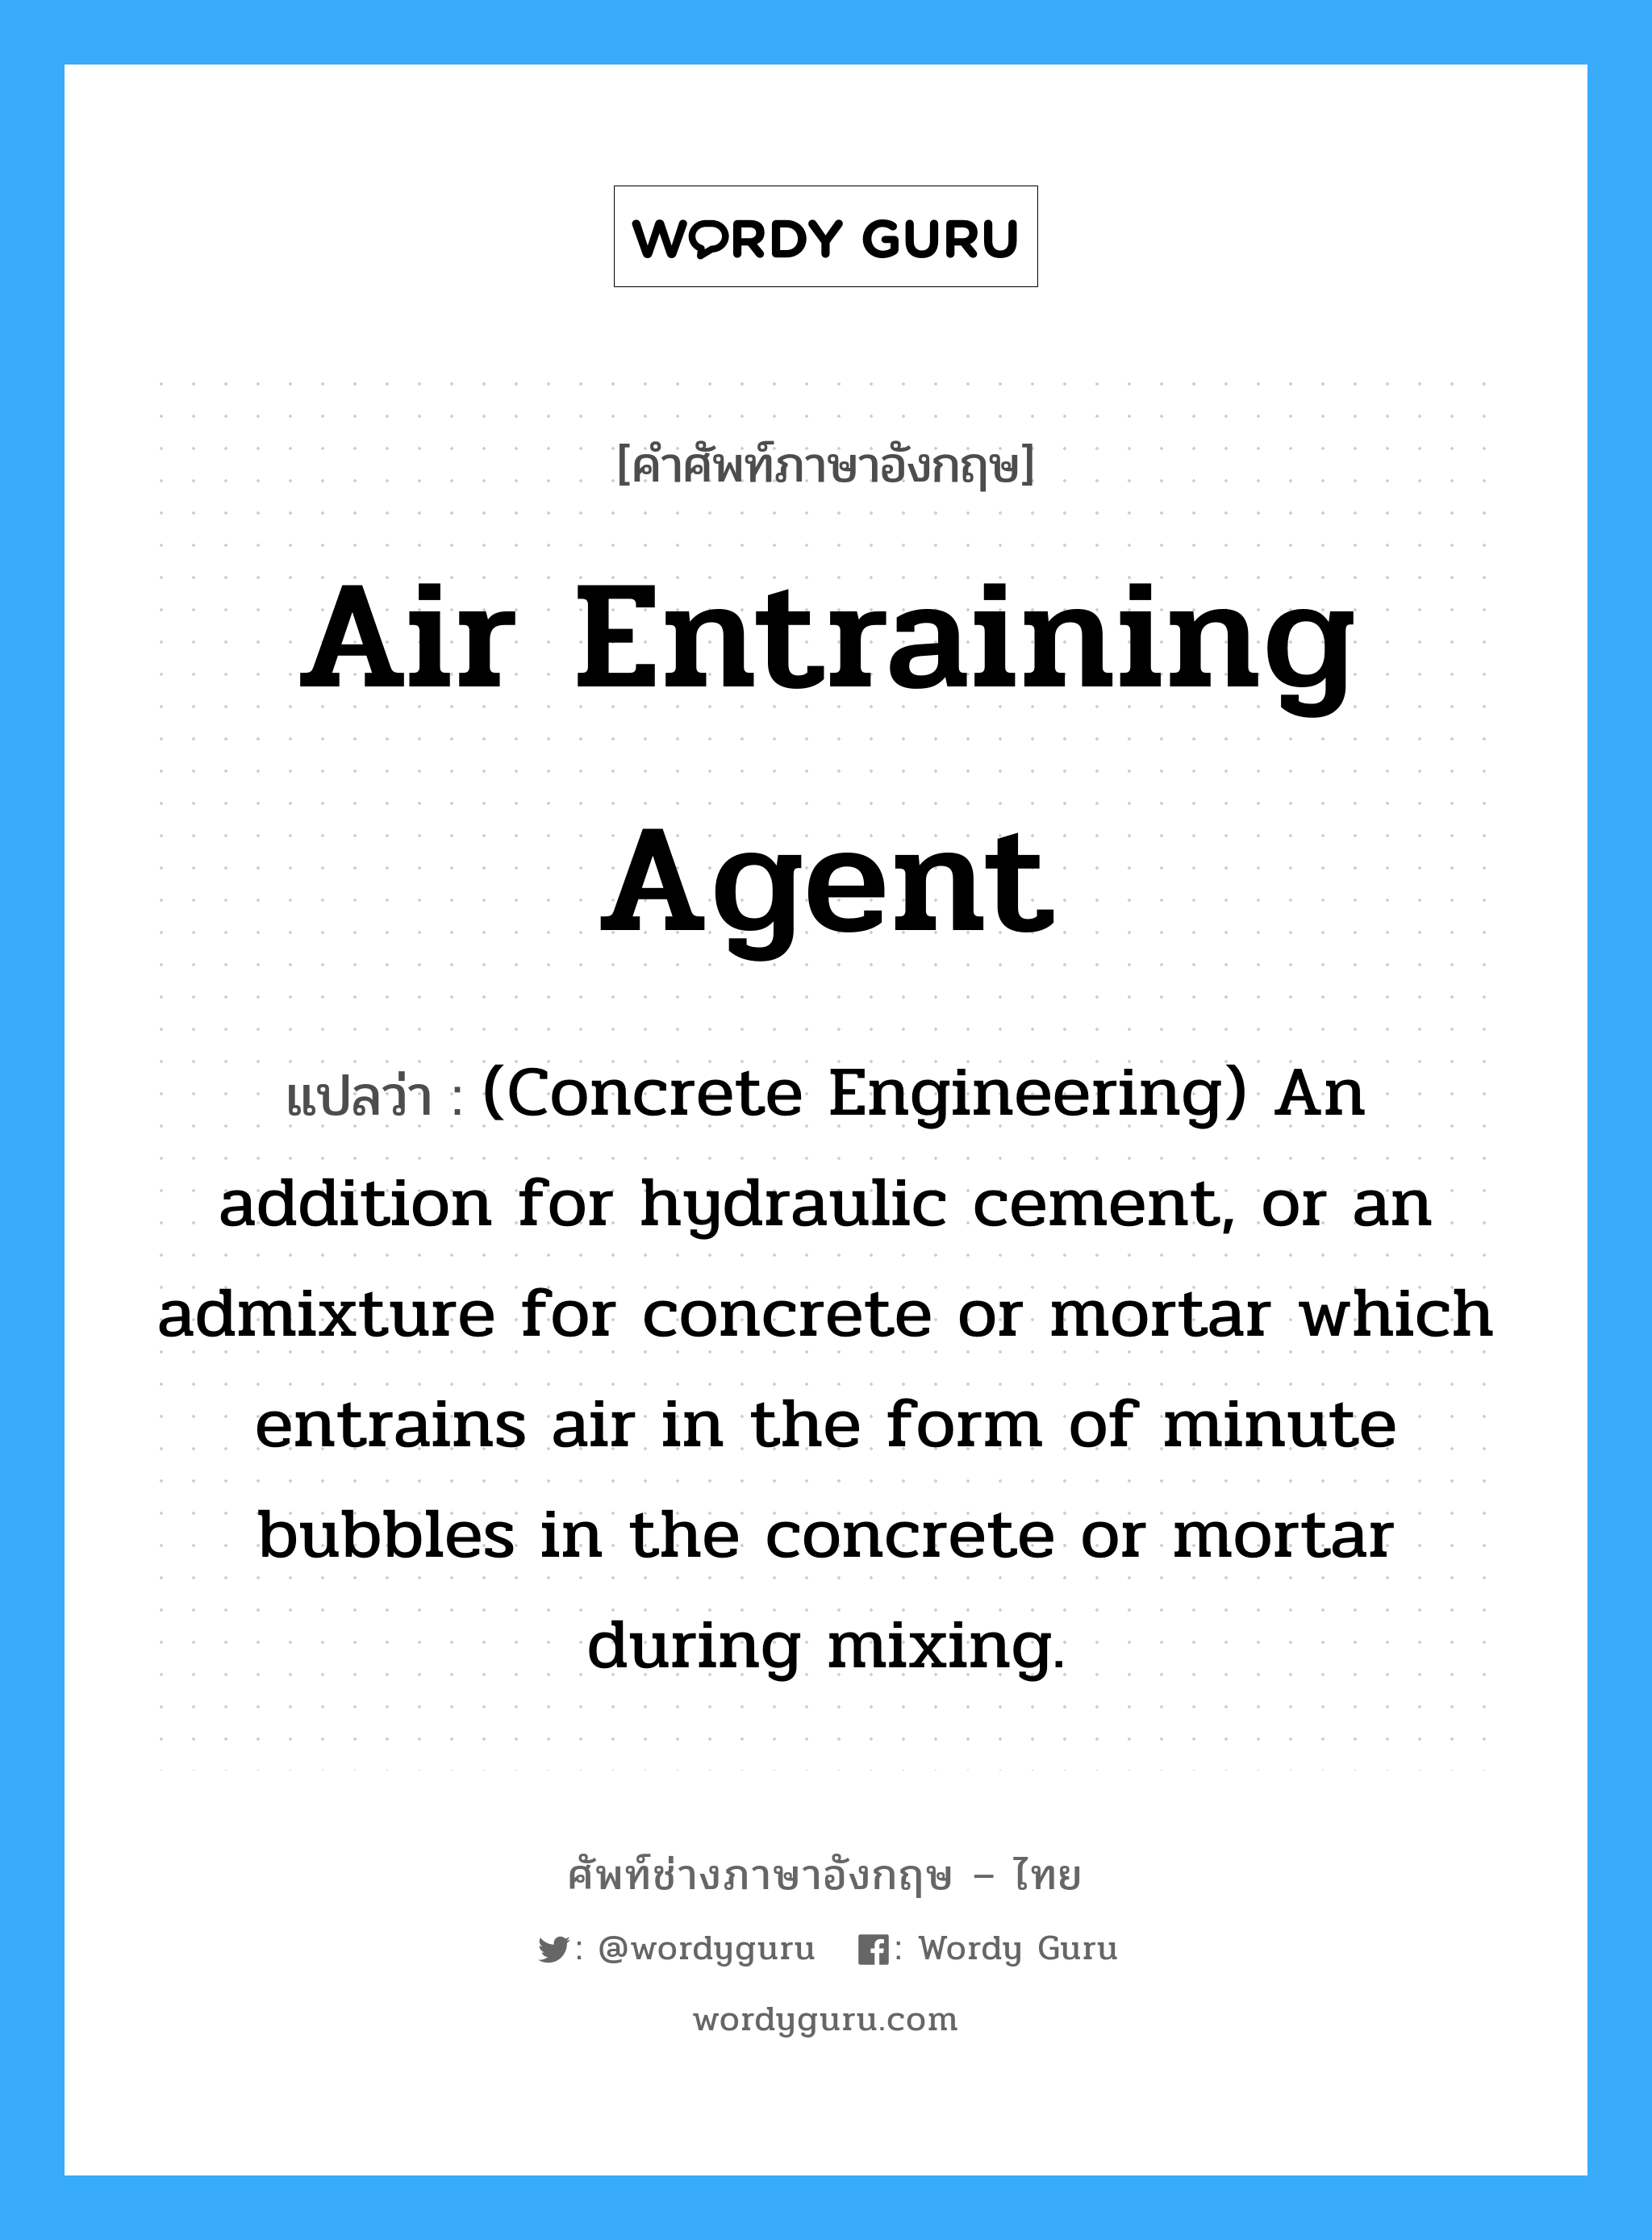 (Concrete Engineering) An addition for hydraulic cement, or an admixture for concrete or mortar which entrains air in the form of minute bubbles in the concrete or mortar during mixing. ภาษาอังกฤษ?, คำศัพท์ช่างภาษาอังกฤษ - ไทย (Concrete Engineering) An addition for hydraulic cement, or an admixture for concrete or mortar which entrains air in the form of minute bubbles in the concrete or mortar during mixing. คำศัพท์ภาษาอังกฤษ (Concrete Engineering) An addition for hydraulic cement, or an admixture for concrete or mortar which entrains air in the form of minute bubbles in the concrete or mortar during mixing. แปลว่า Air Entraining Agent